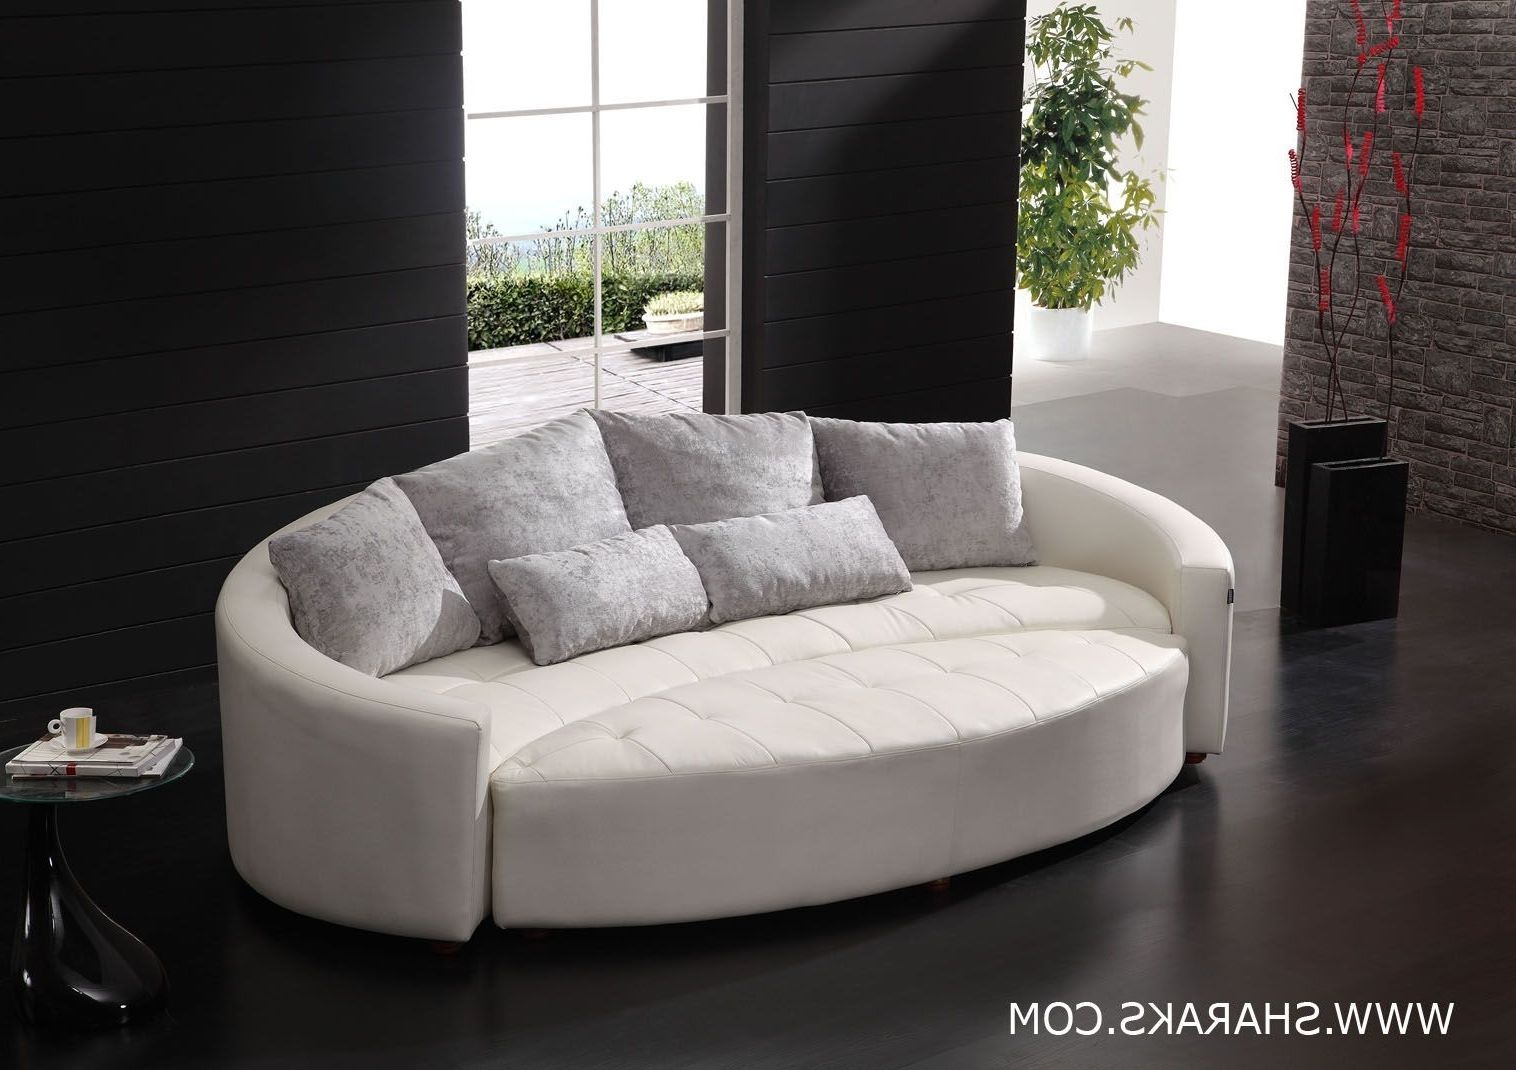 Cornering The Curved Leather Sofas Pertaining To Rounded Sofas (View 1 of 20)